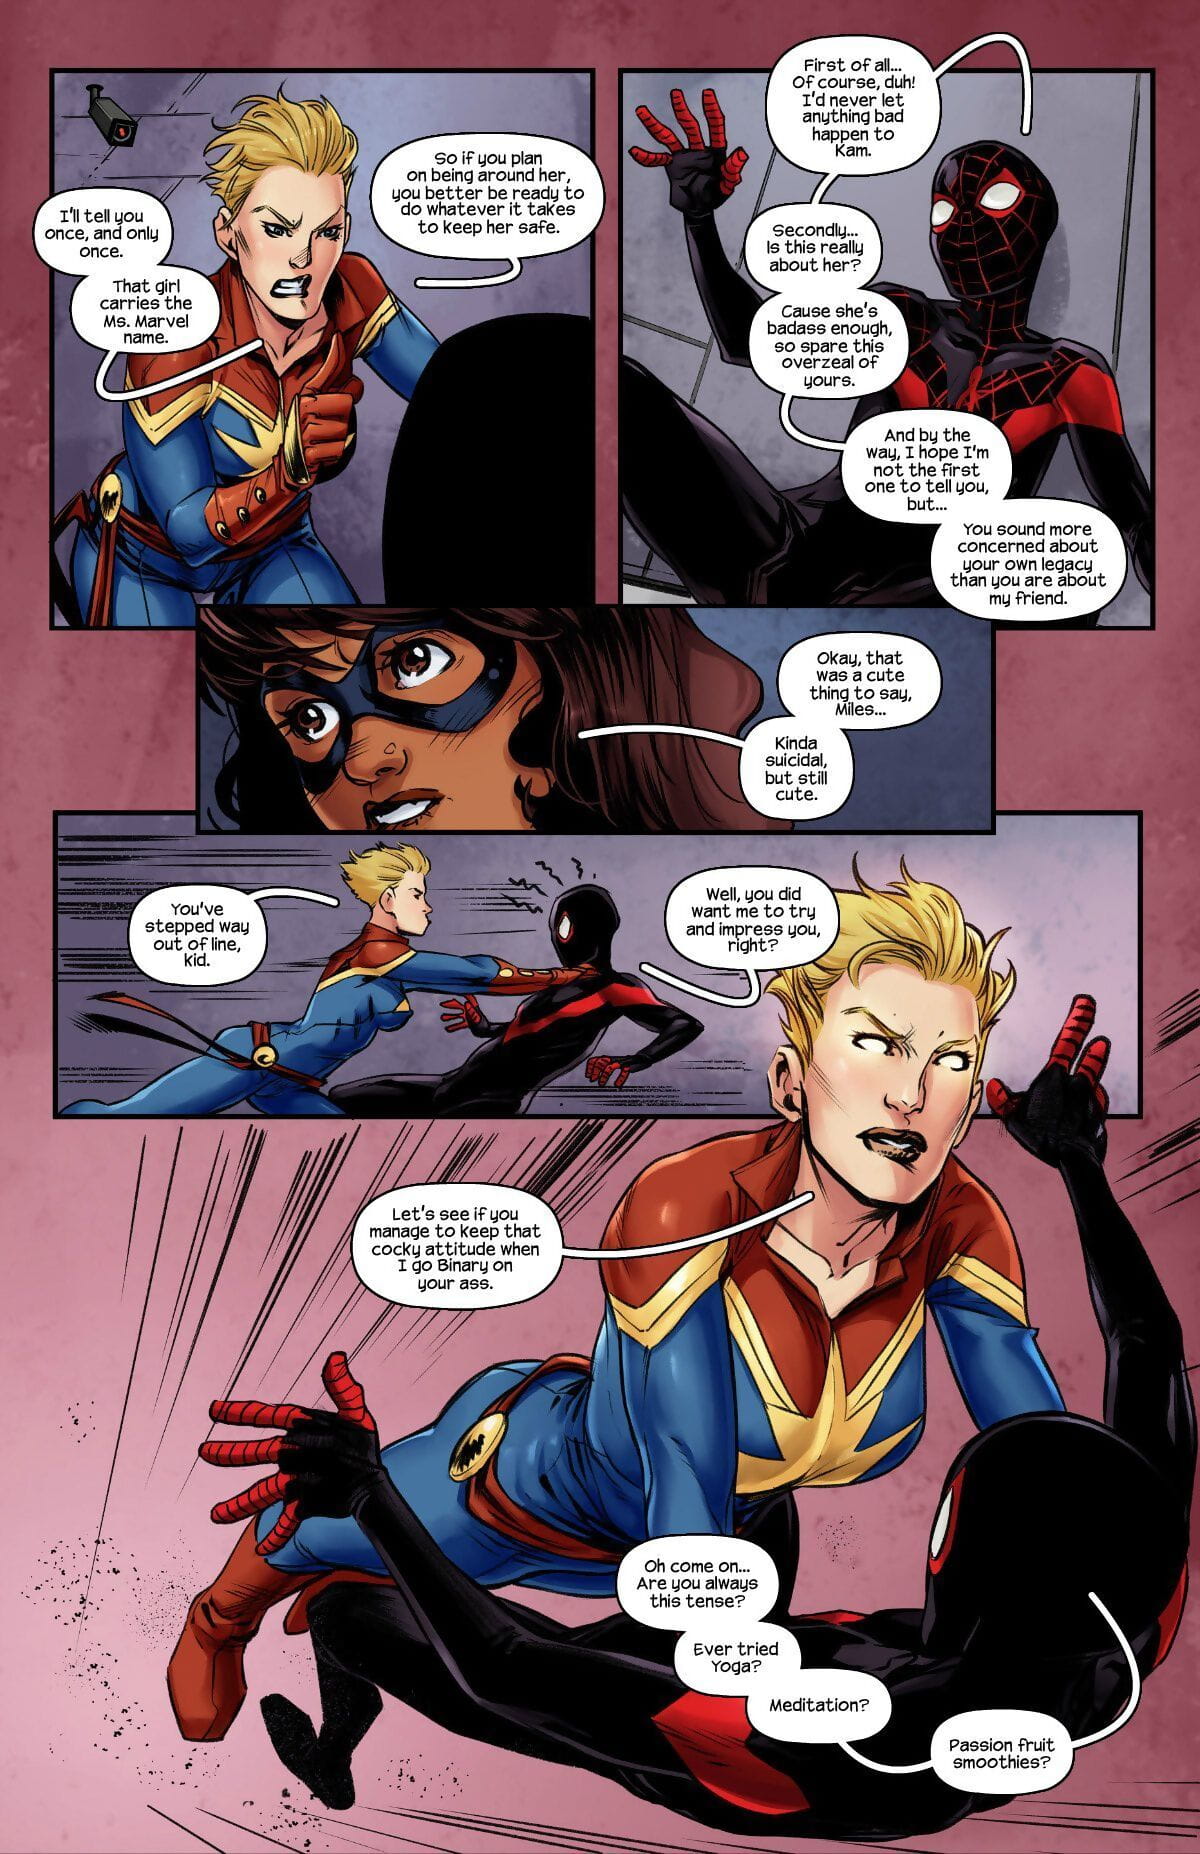 Tracy scops ms.marvel スパイダーマン 002 – bayushi page 1